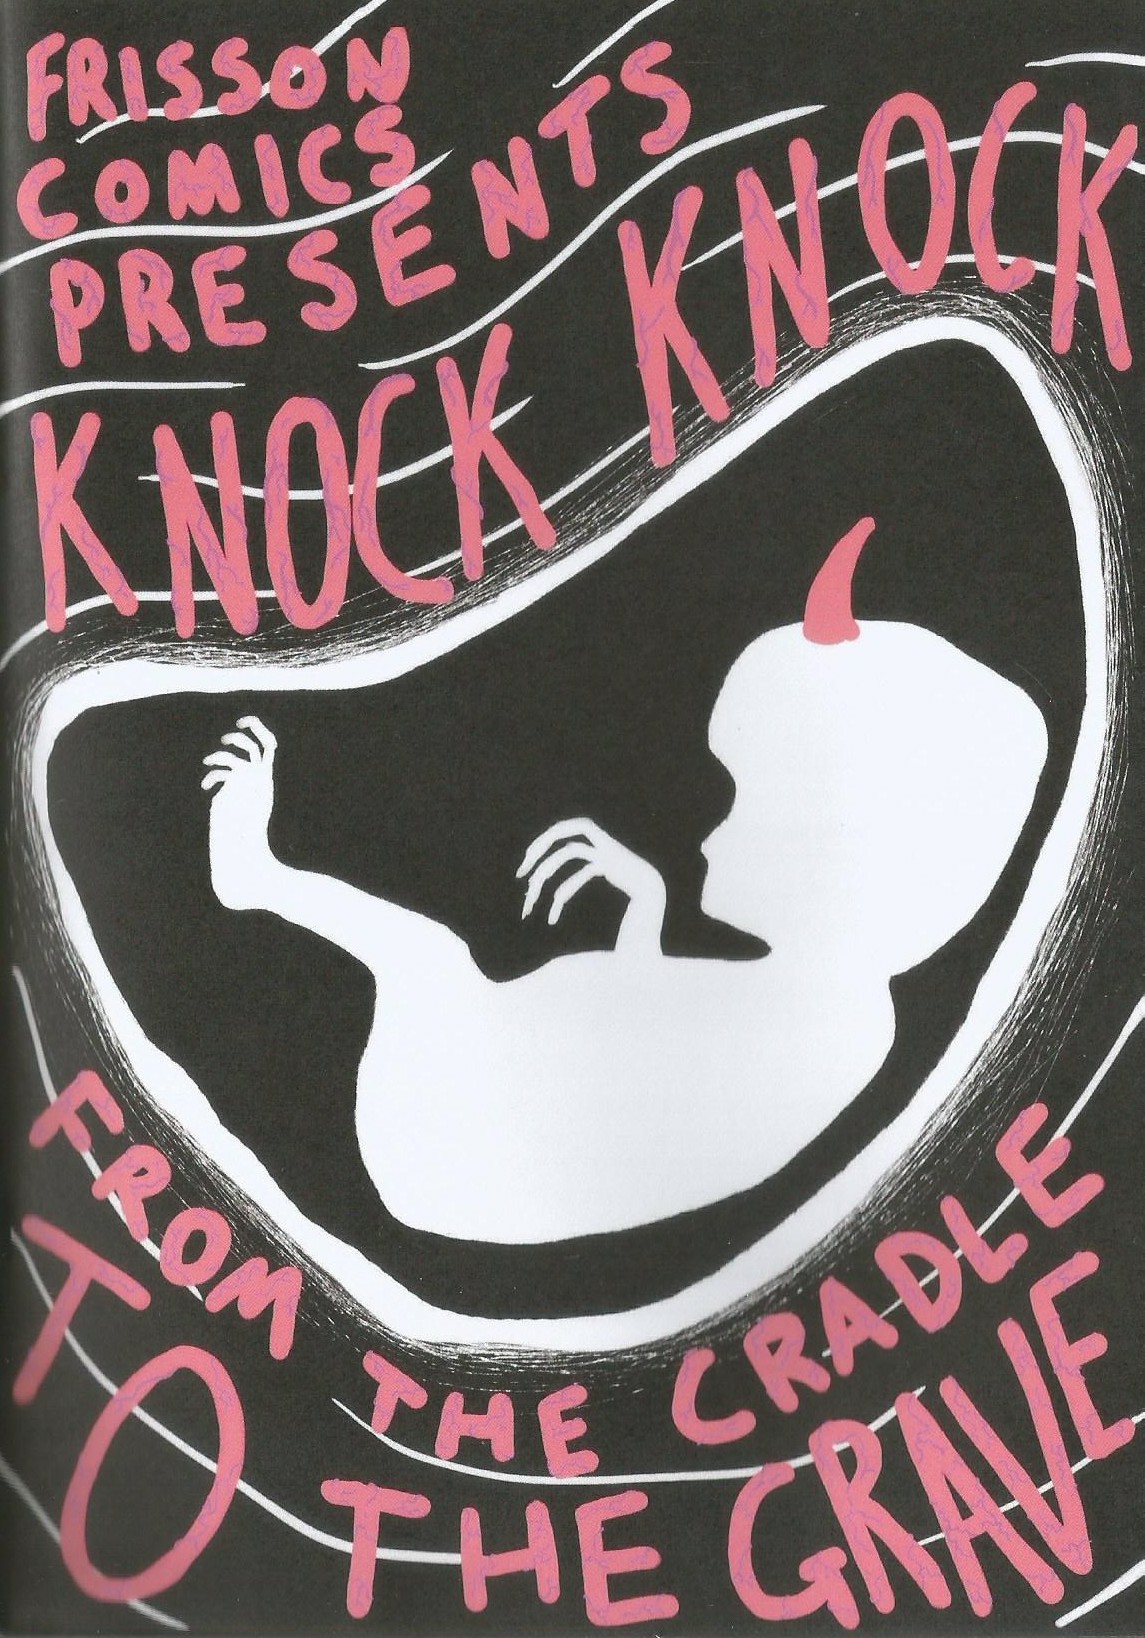 Knock Knock: From The Cradle To The Grave (Frisson Comics) - 2019